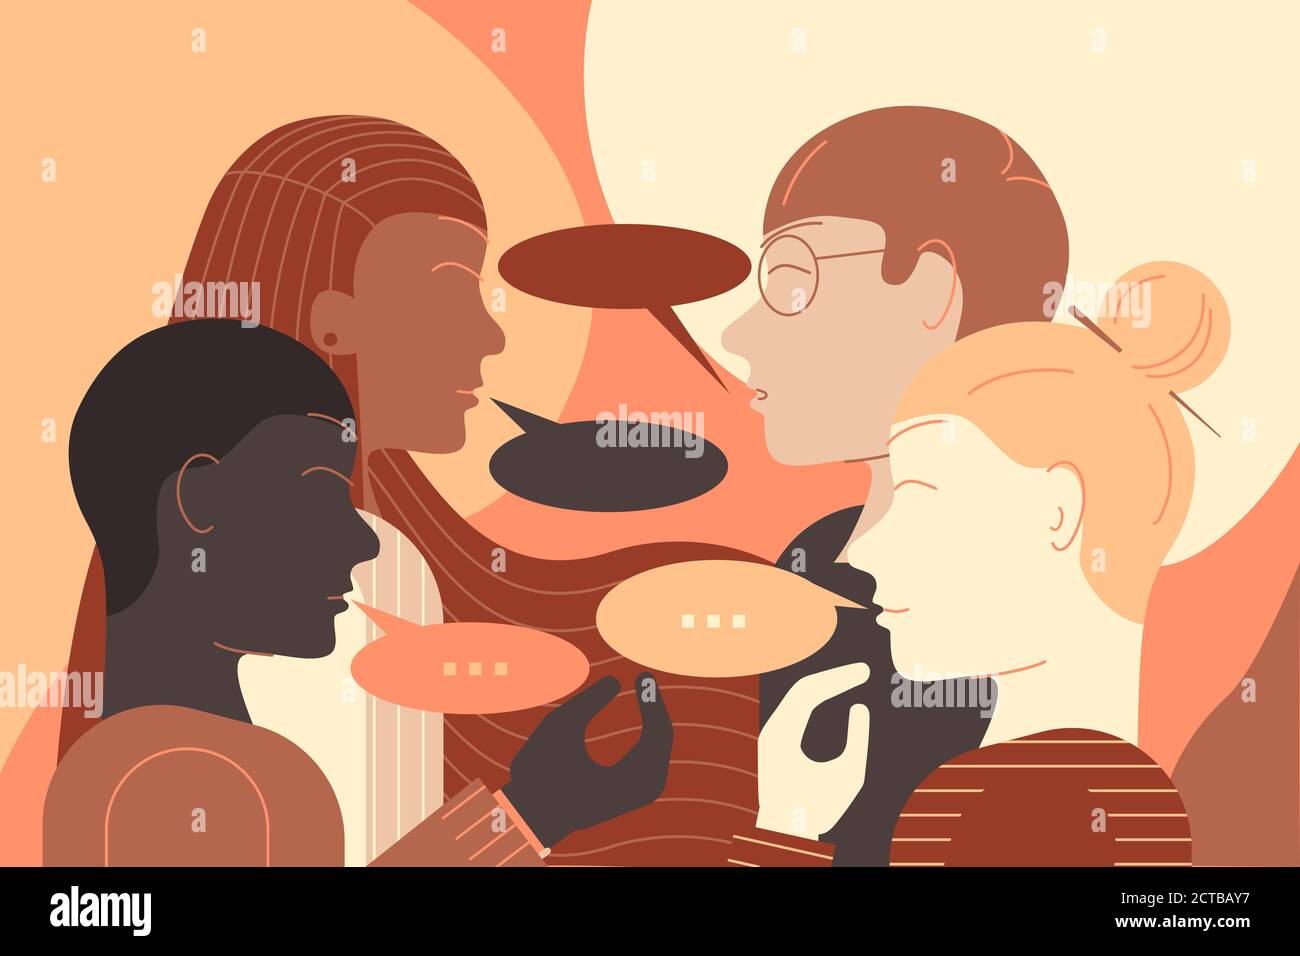 Illustration of a group of young people of different ethnics having a conversation face to face. Flat design illustration. Stock Photo